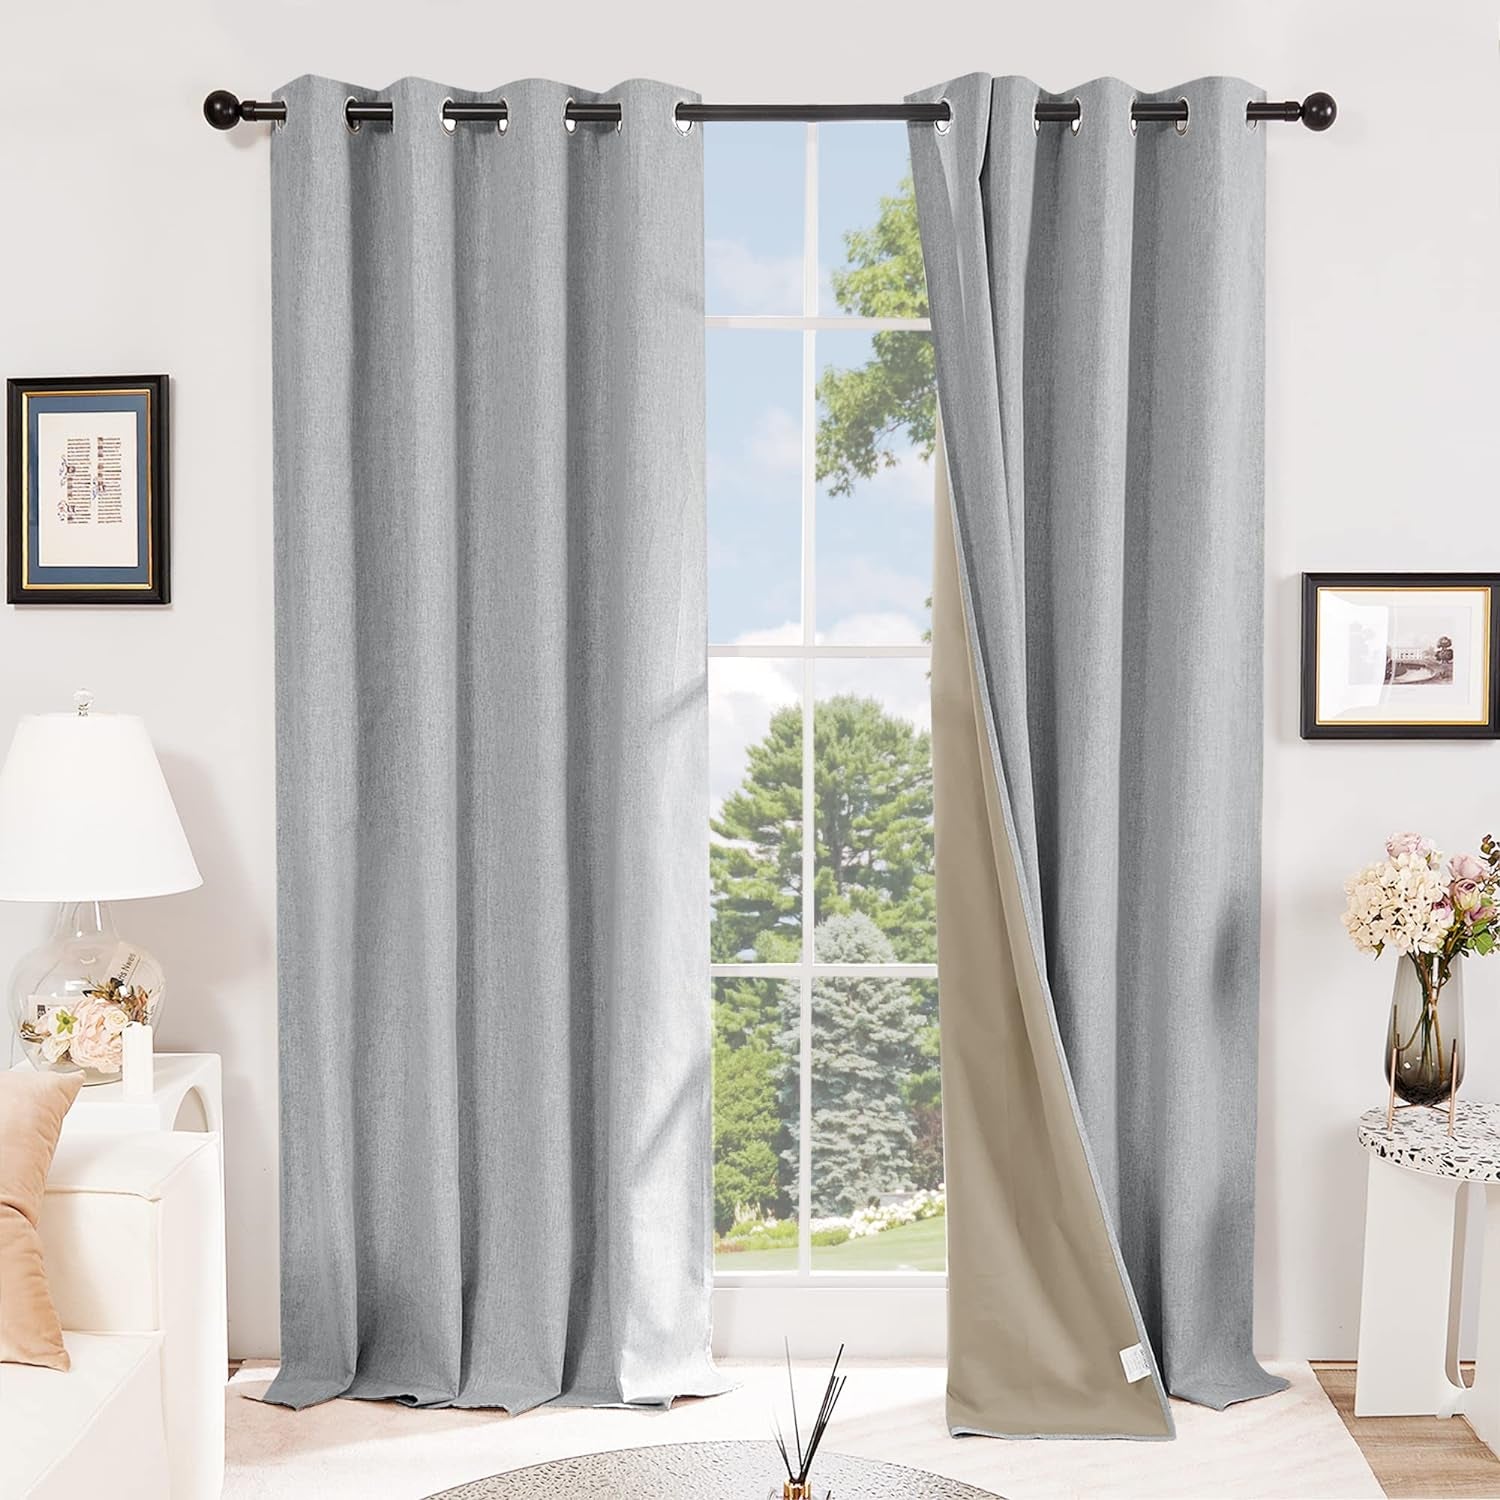 Deconovo Faux Linen Total Blackout Curtains 63 Inches Length, Light Blue, Grommet Thermal Insulated Curtain, Noise Reduction Draperies for Bedroom Living Room, 52" W X 63" L, 1 Pair  DECONOVO Dark Grey 52Wx84L Inch 